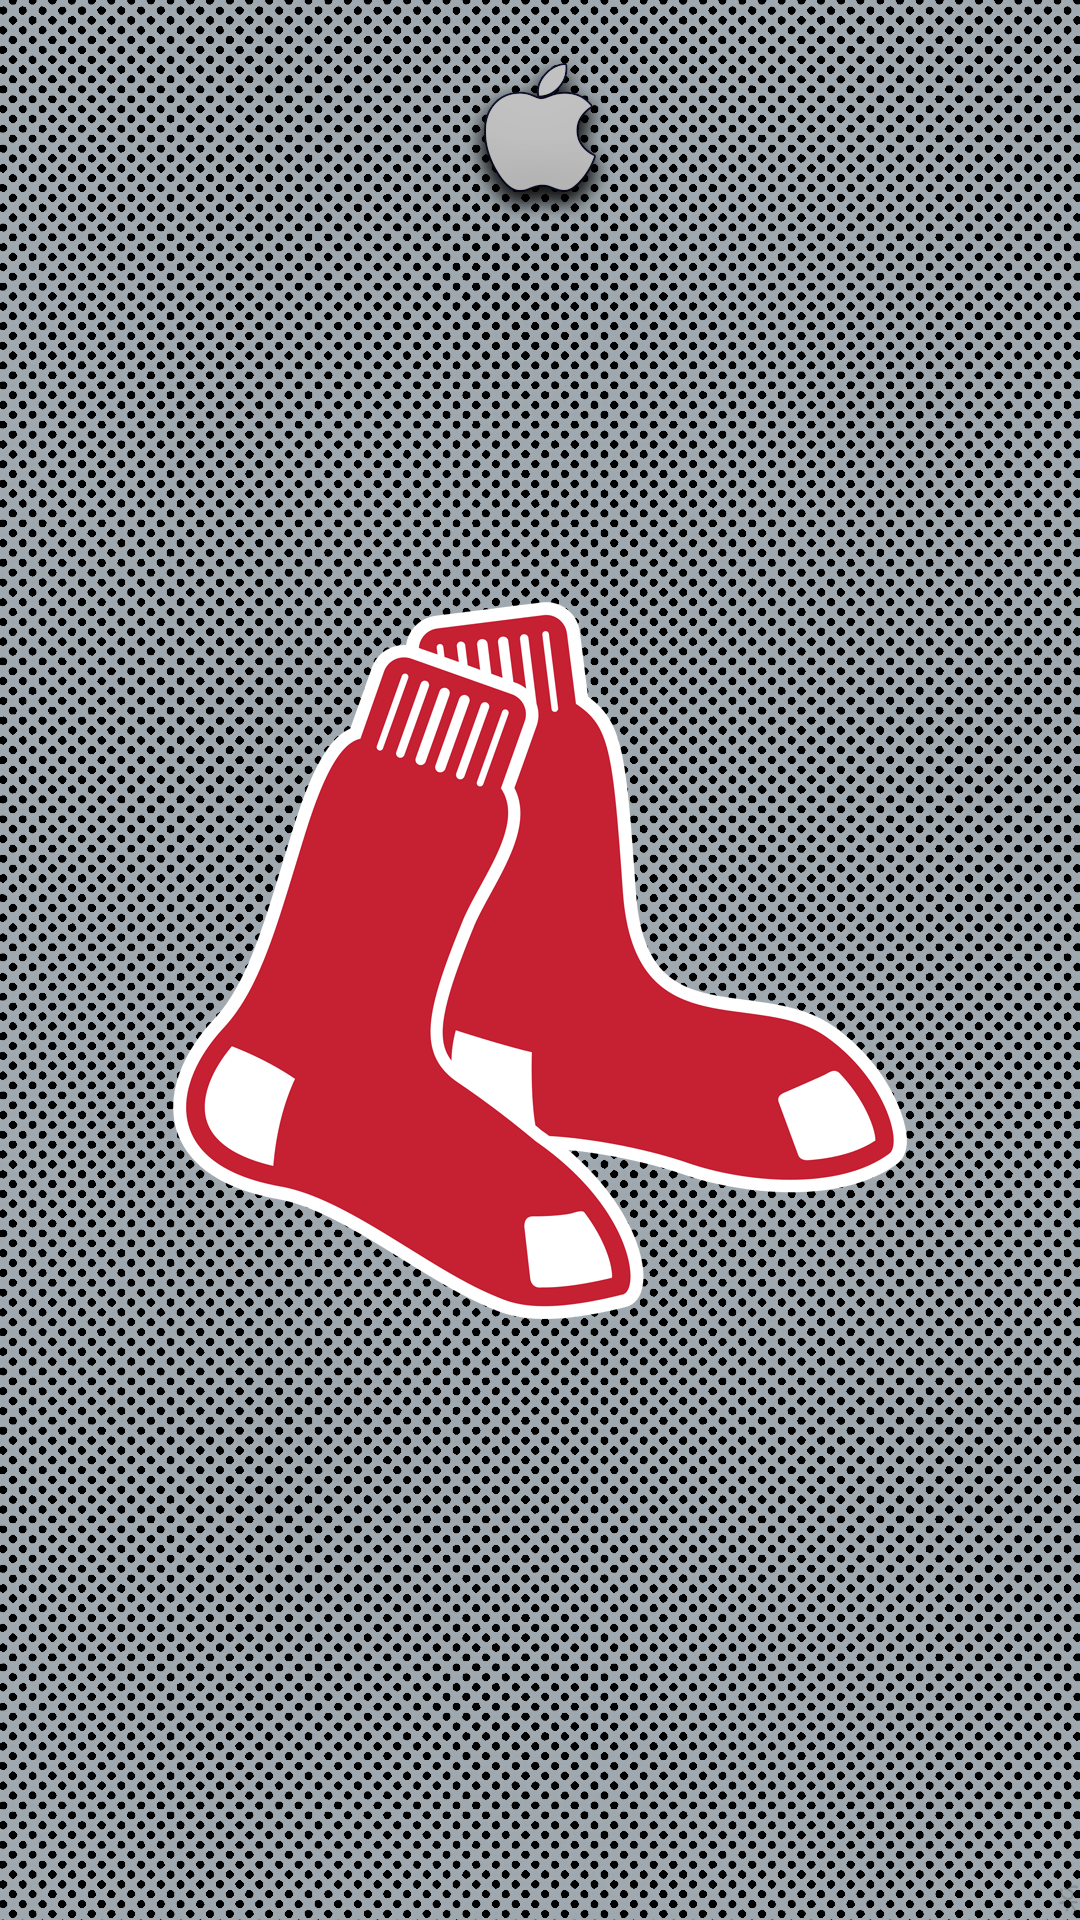 Red Sox 2022 Wallpapers - Wallpaper Cave